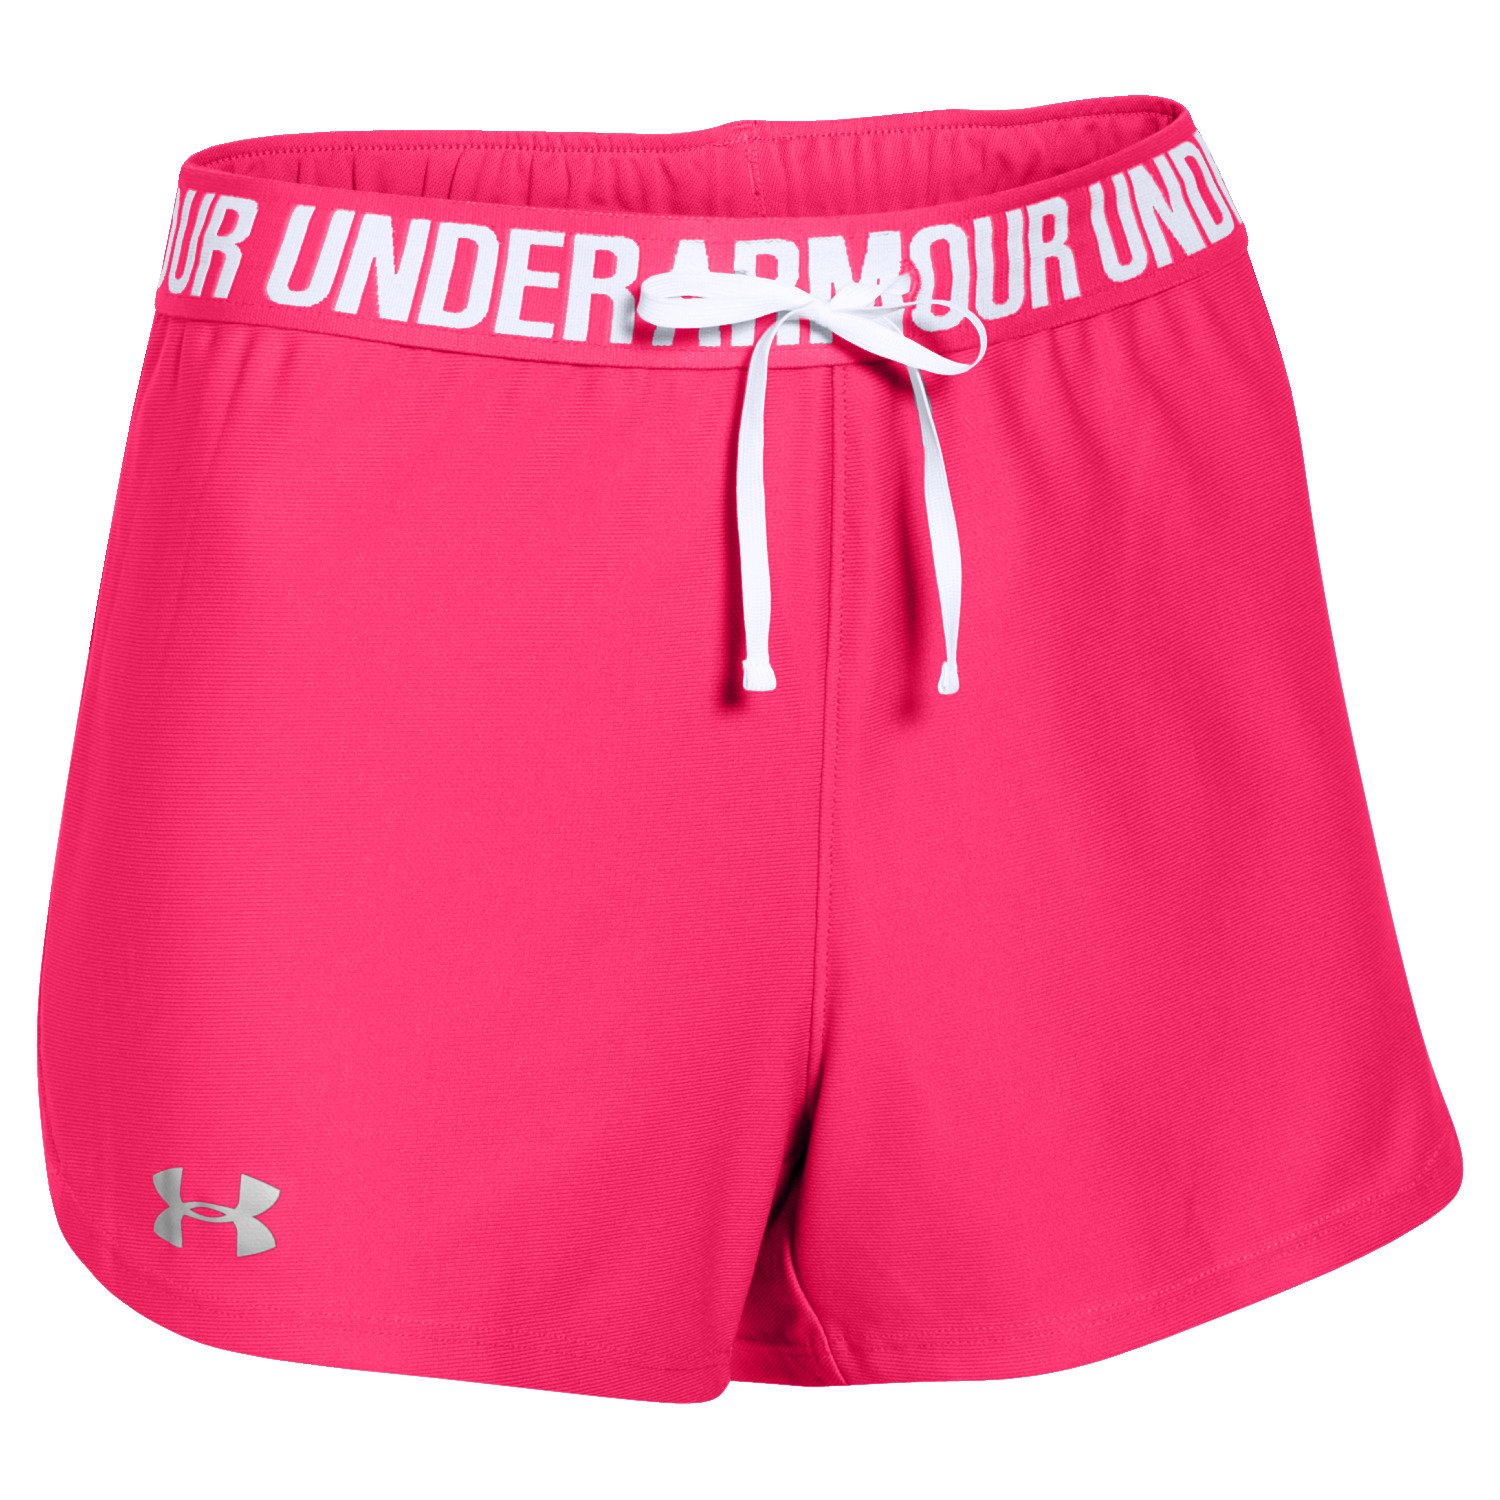 under armour shorts green